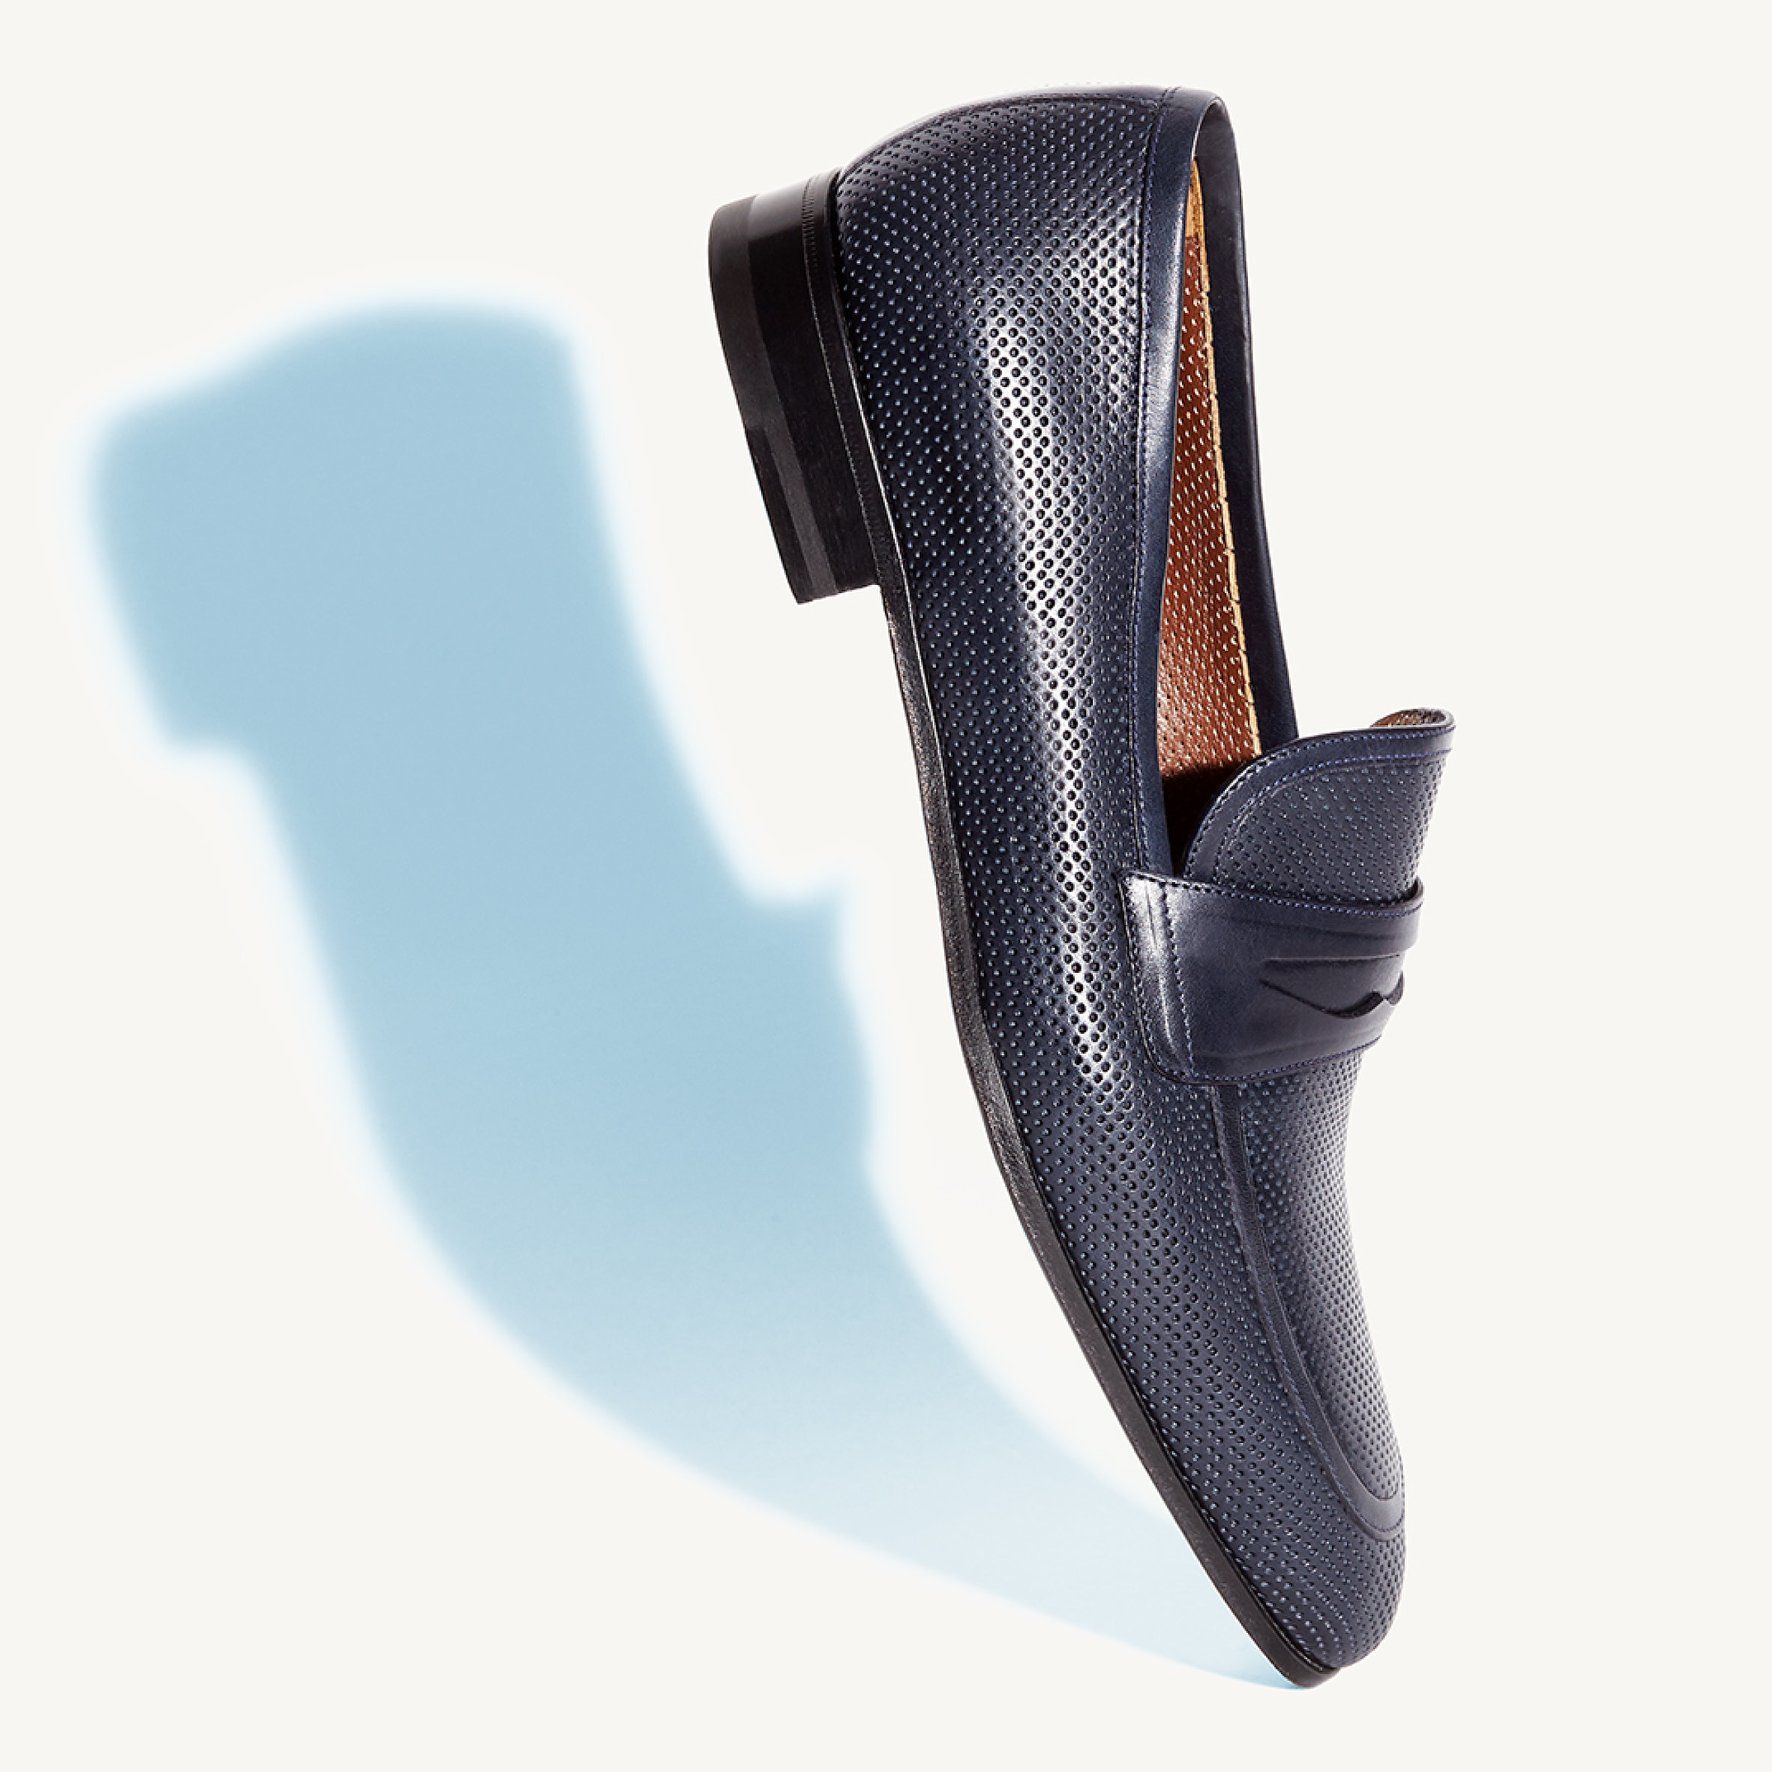 Light, fresh and stylish: our perforated loafers are a must-have for summer. #atestoni #atestonihongkong #leather #ss19 #shoes #madeinitaly ► Follow our Instagram: @a.testoniHongKong ...